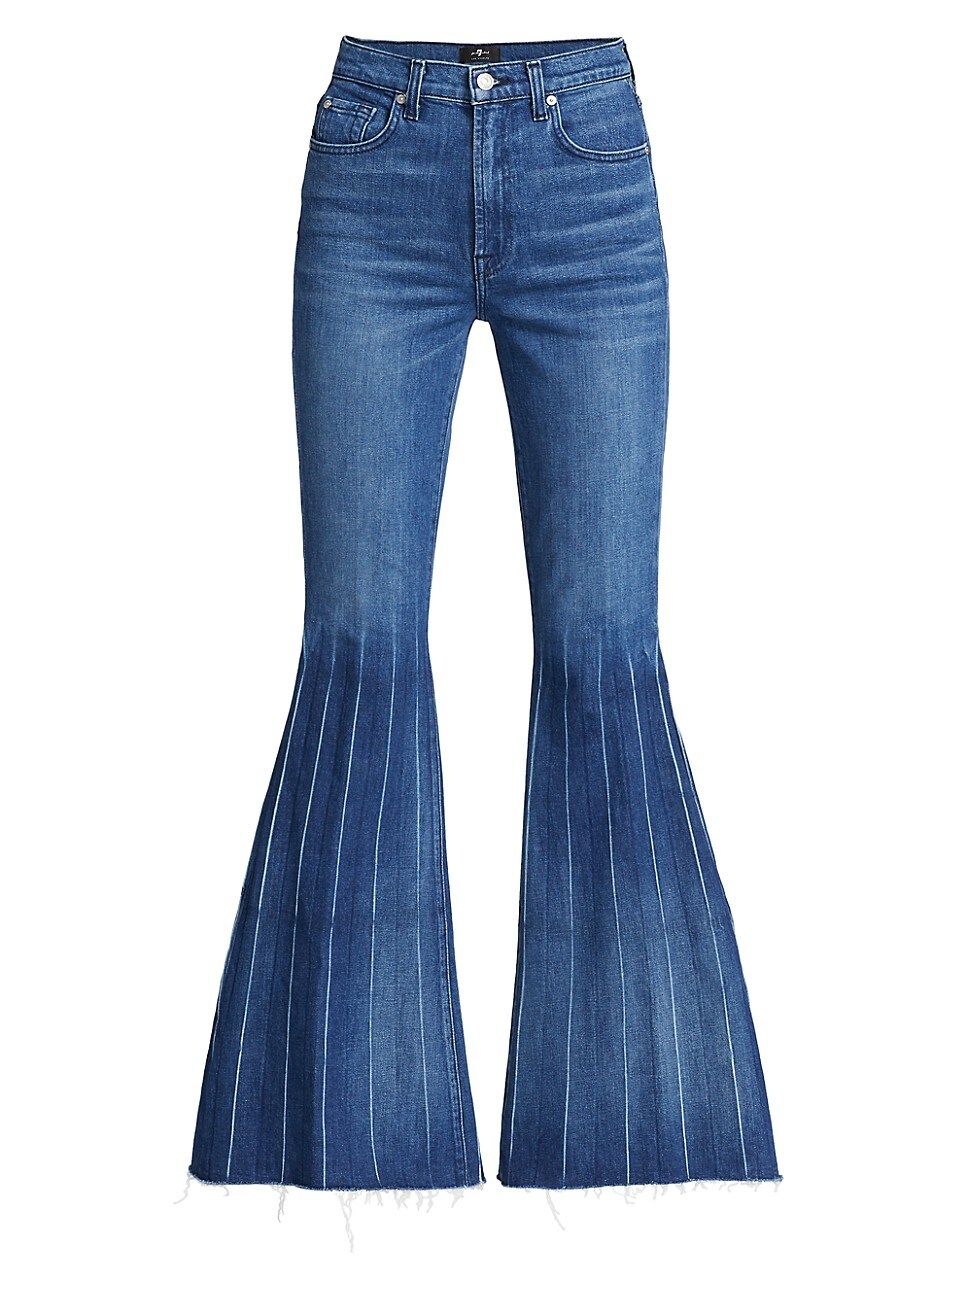 7 For All Mankind Women's High-Rise Mega-Flare Jeans - Greenwich - Size Denim: 28 | Saks Fifth Avenue